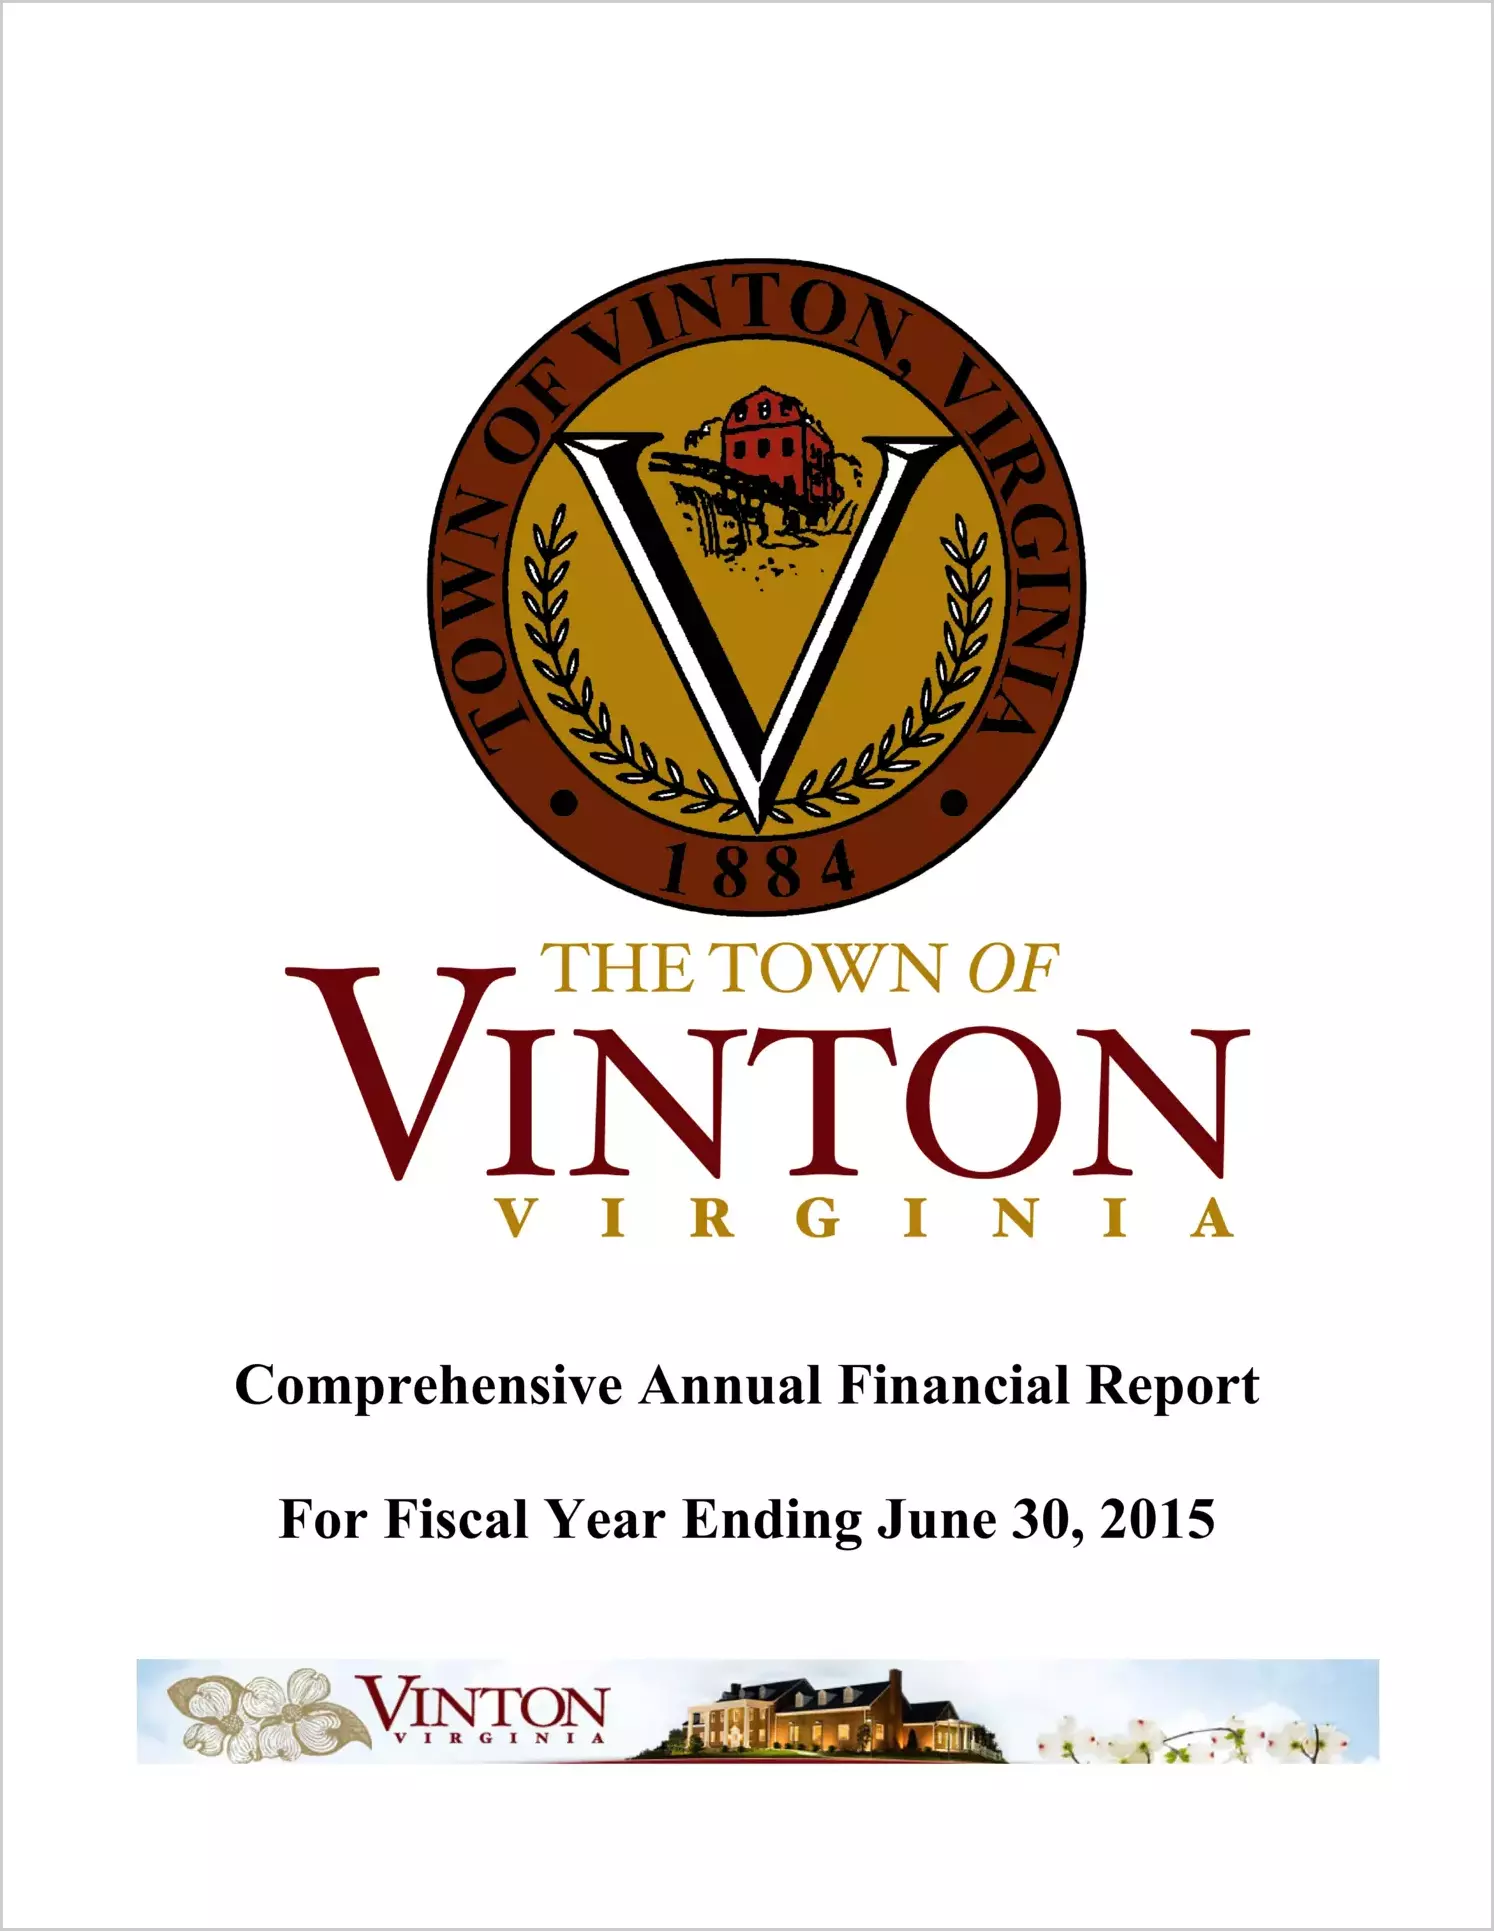 2015 Annual Financial Report for Town of Vinton